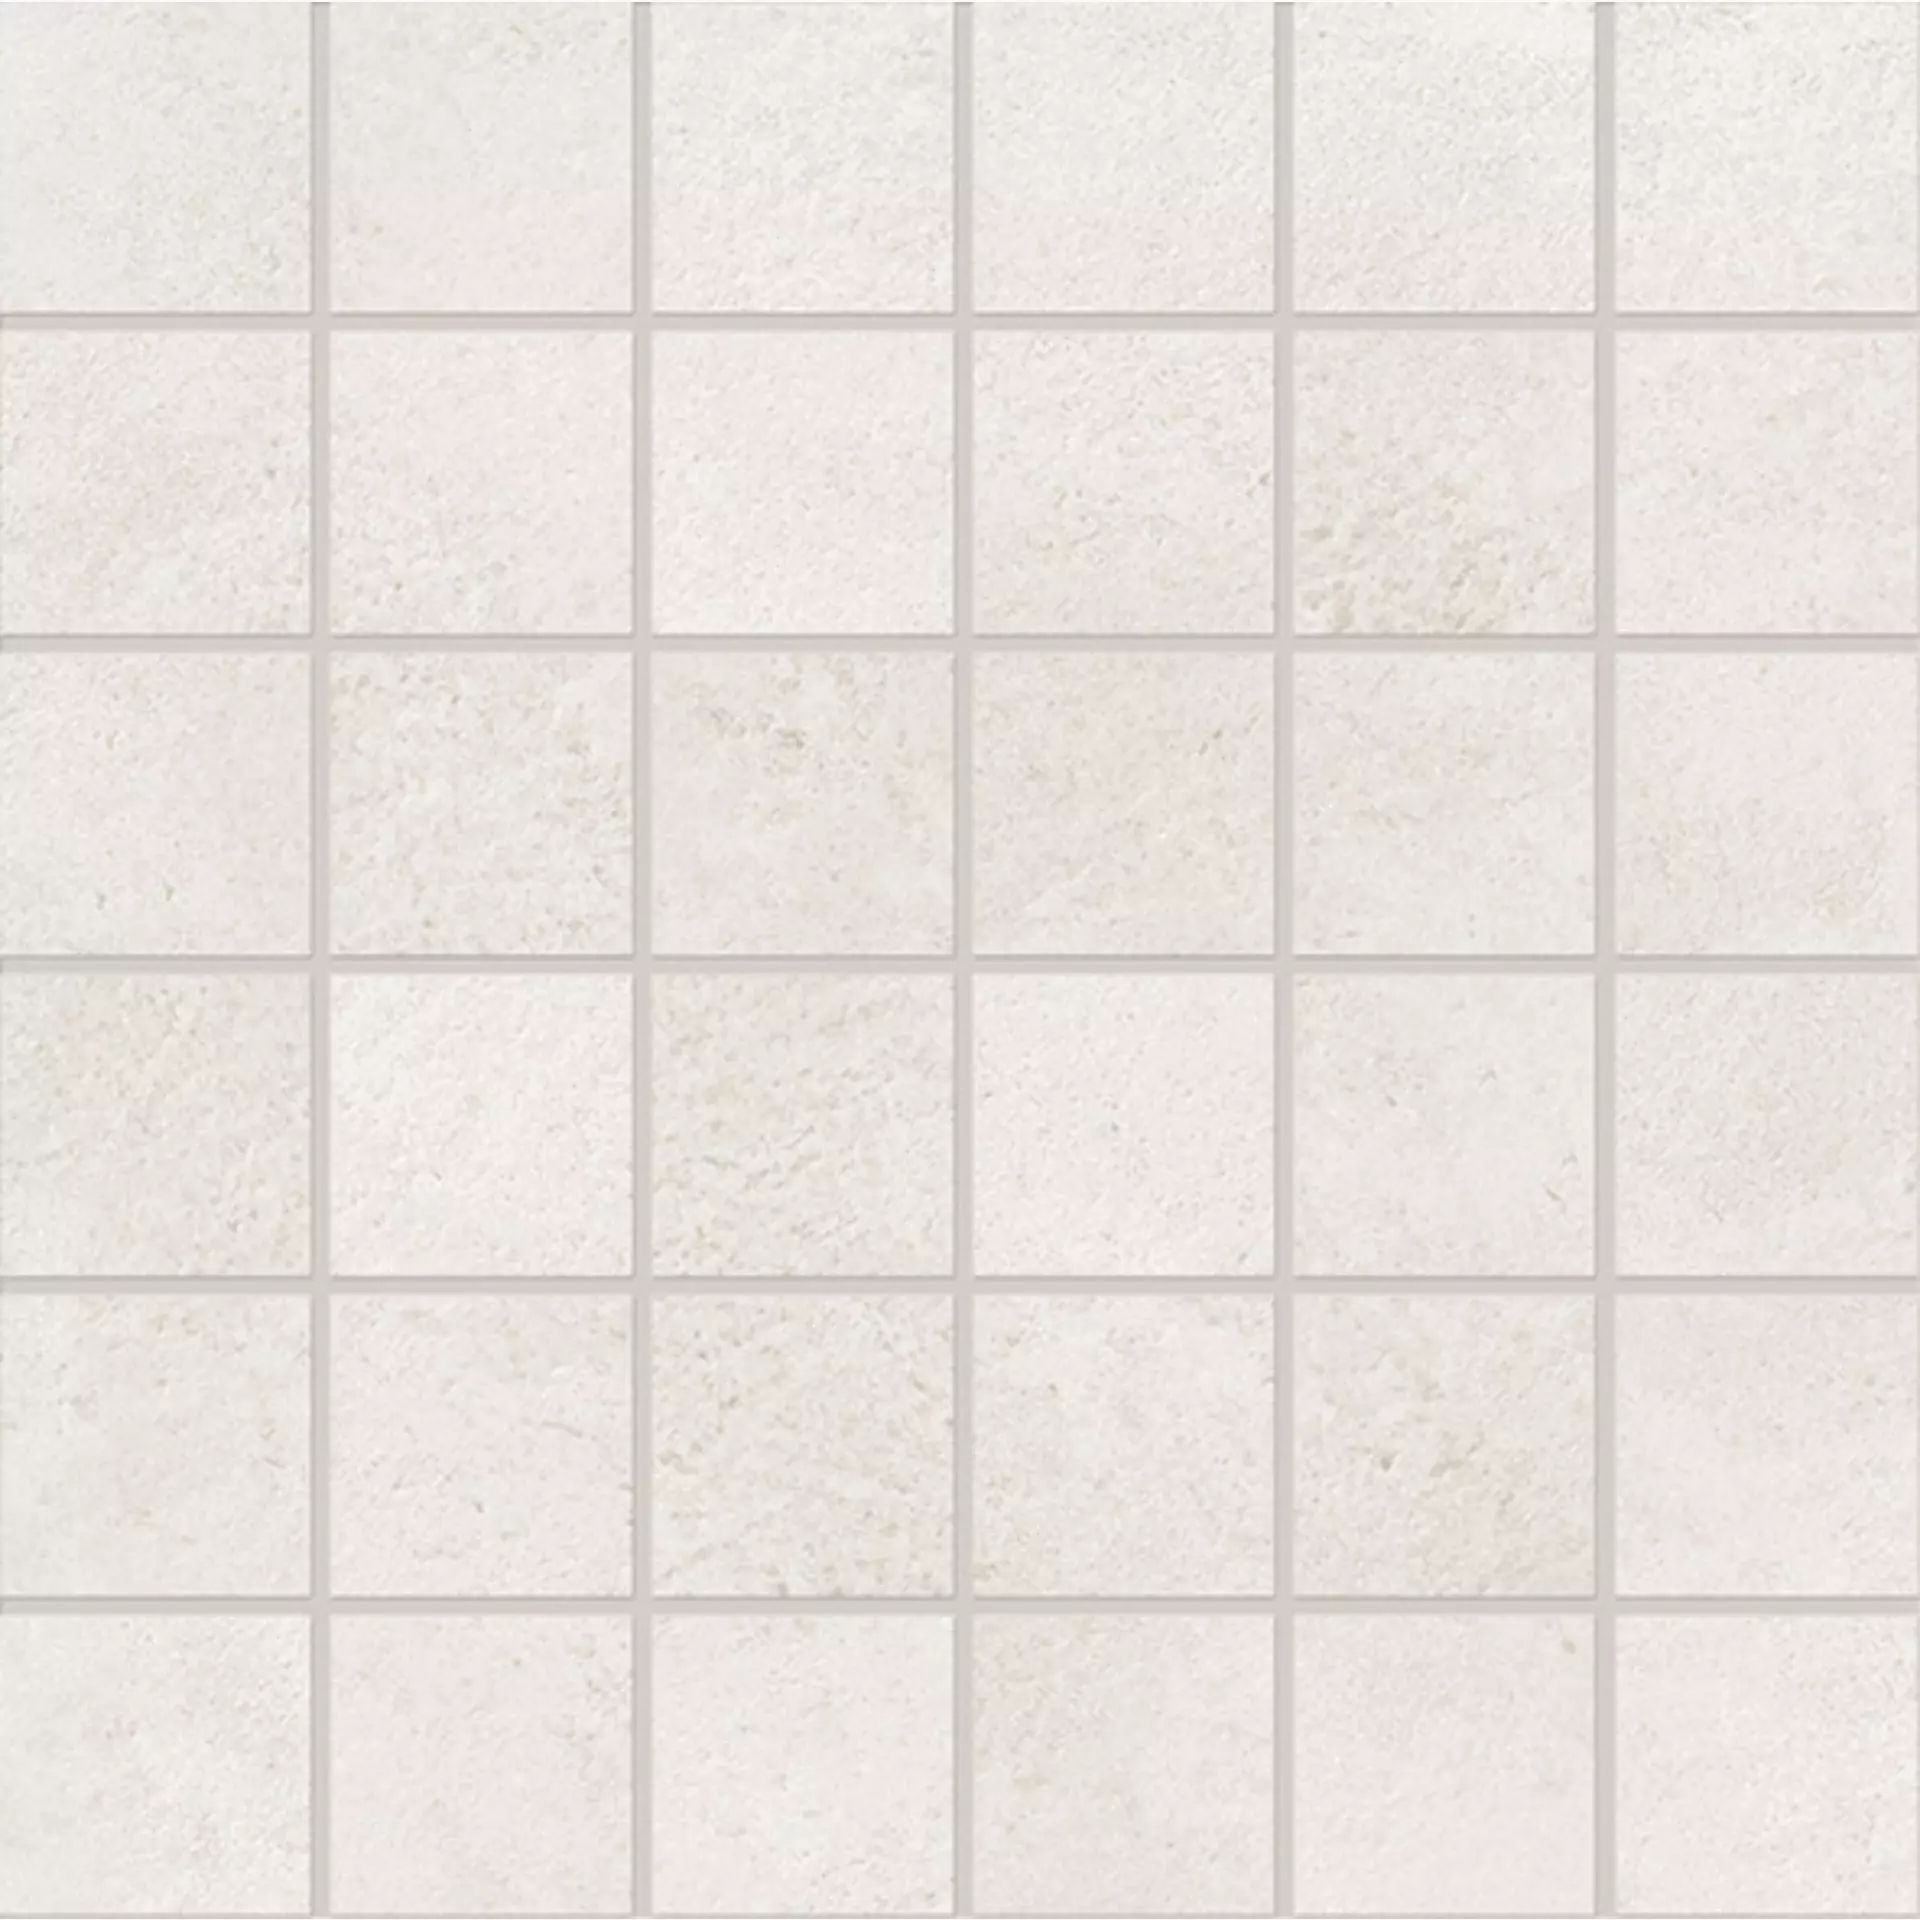 Supergres Colovers Love White Naturale – Matt Mosaic LSHS 30x30cm rectified 9mm